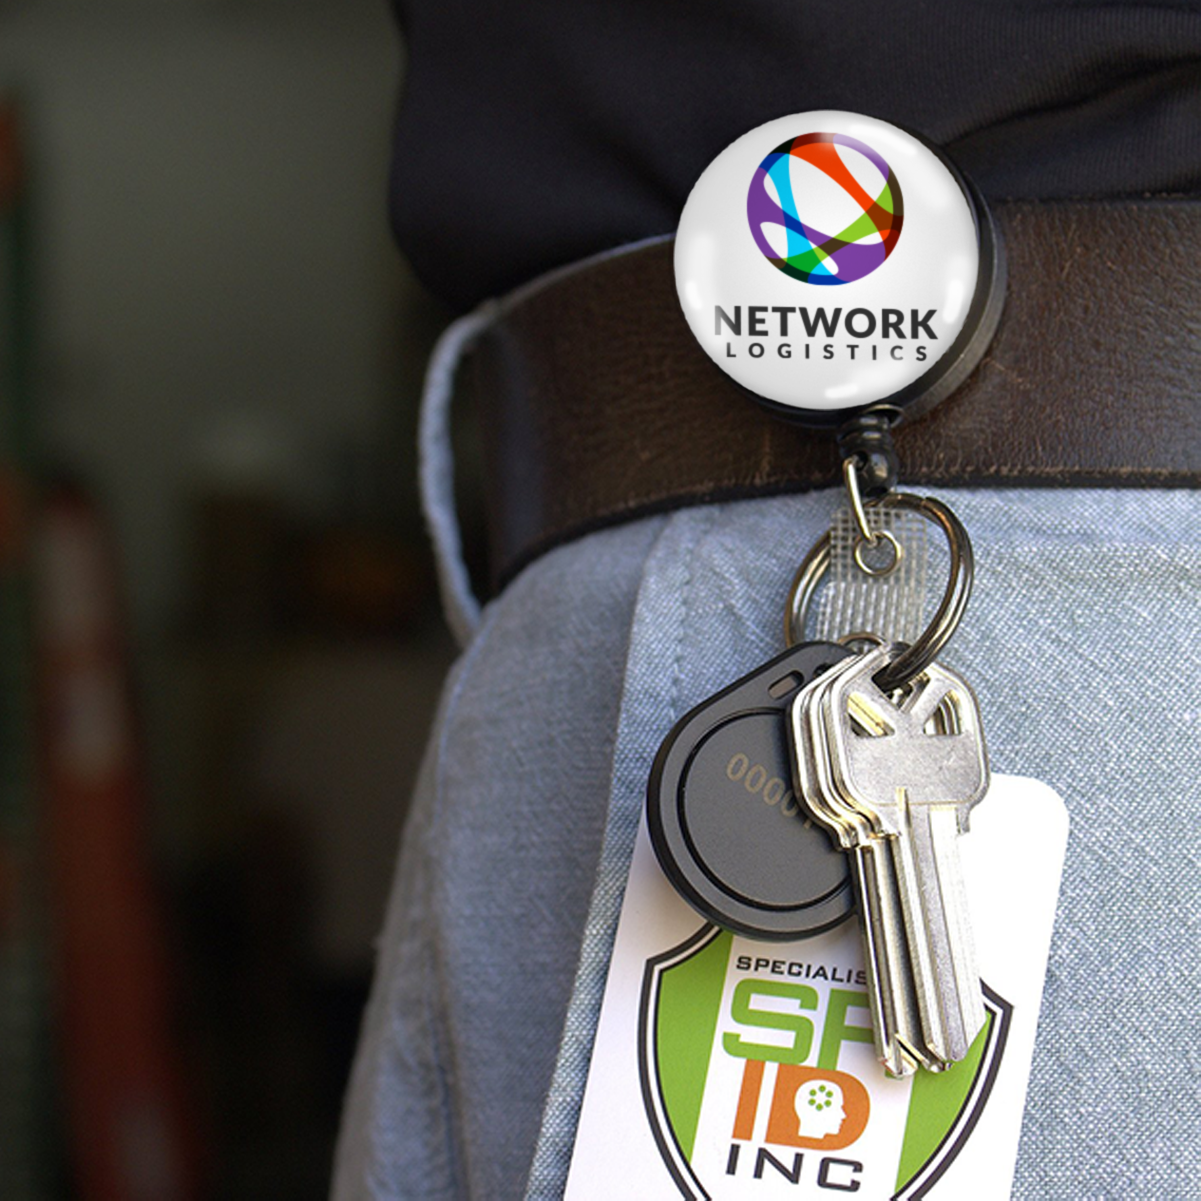 A close-up of a person wearing a Custom Heavy Duty Badge Reel with Key Ring and Badge Strap (SPID-3180) - Add Your Logo with the logo "Network Logistics" attached to their belt. The retractable keychain holds several keys and a white card with "SPD Inc" printed on it, serving as both key ring and personalized identification display.